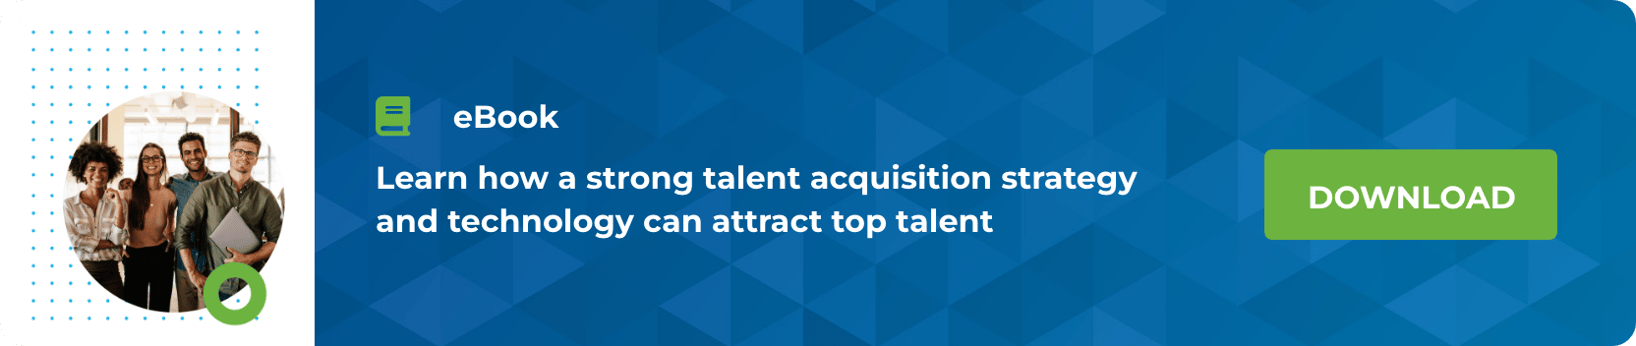 eBook  Learn how a strong talent acquisition strategy and technology can attract top talent